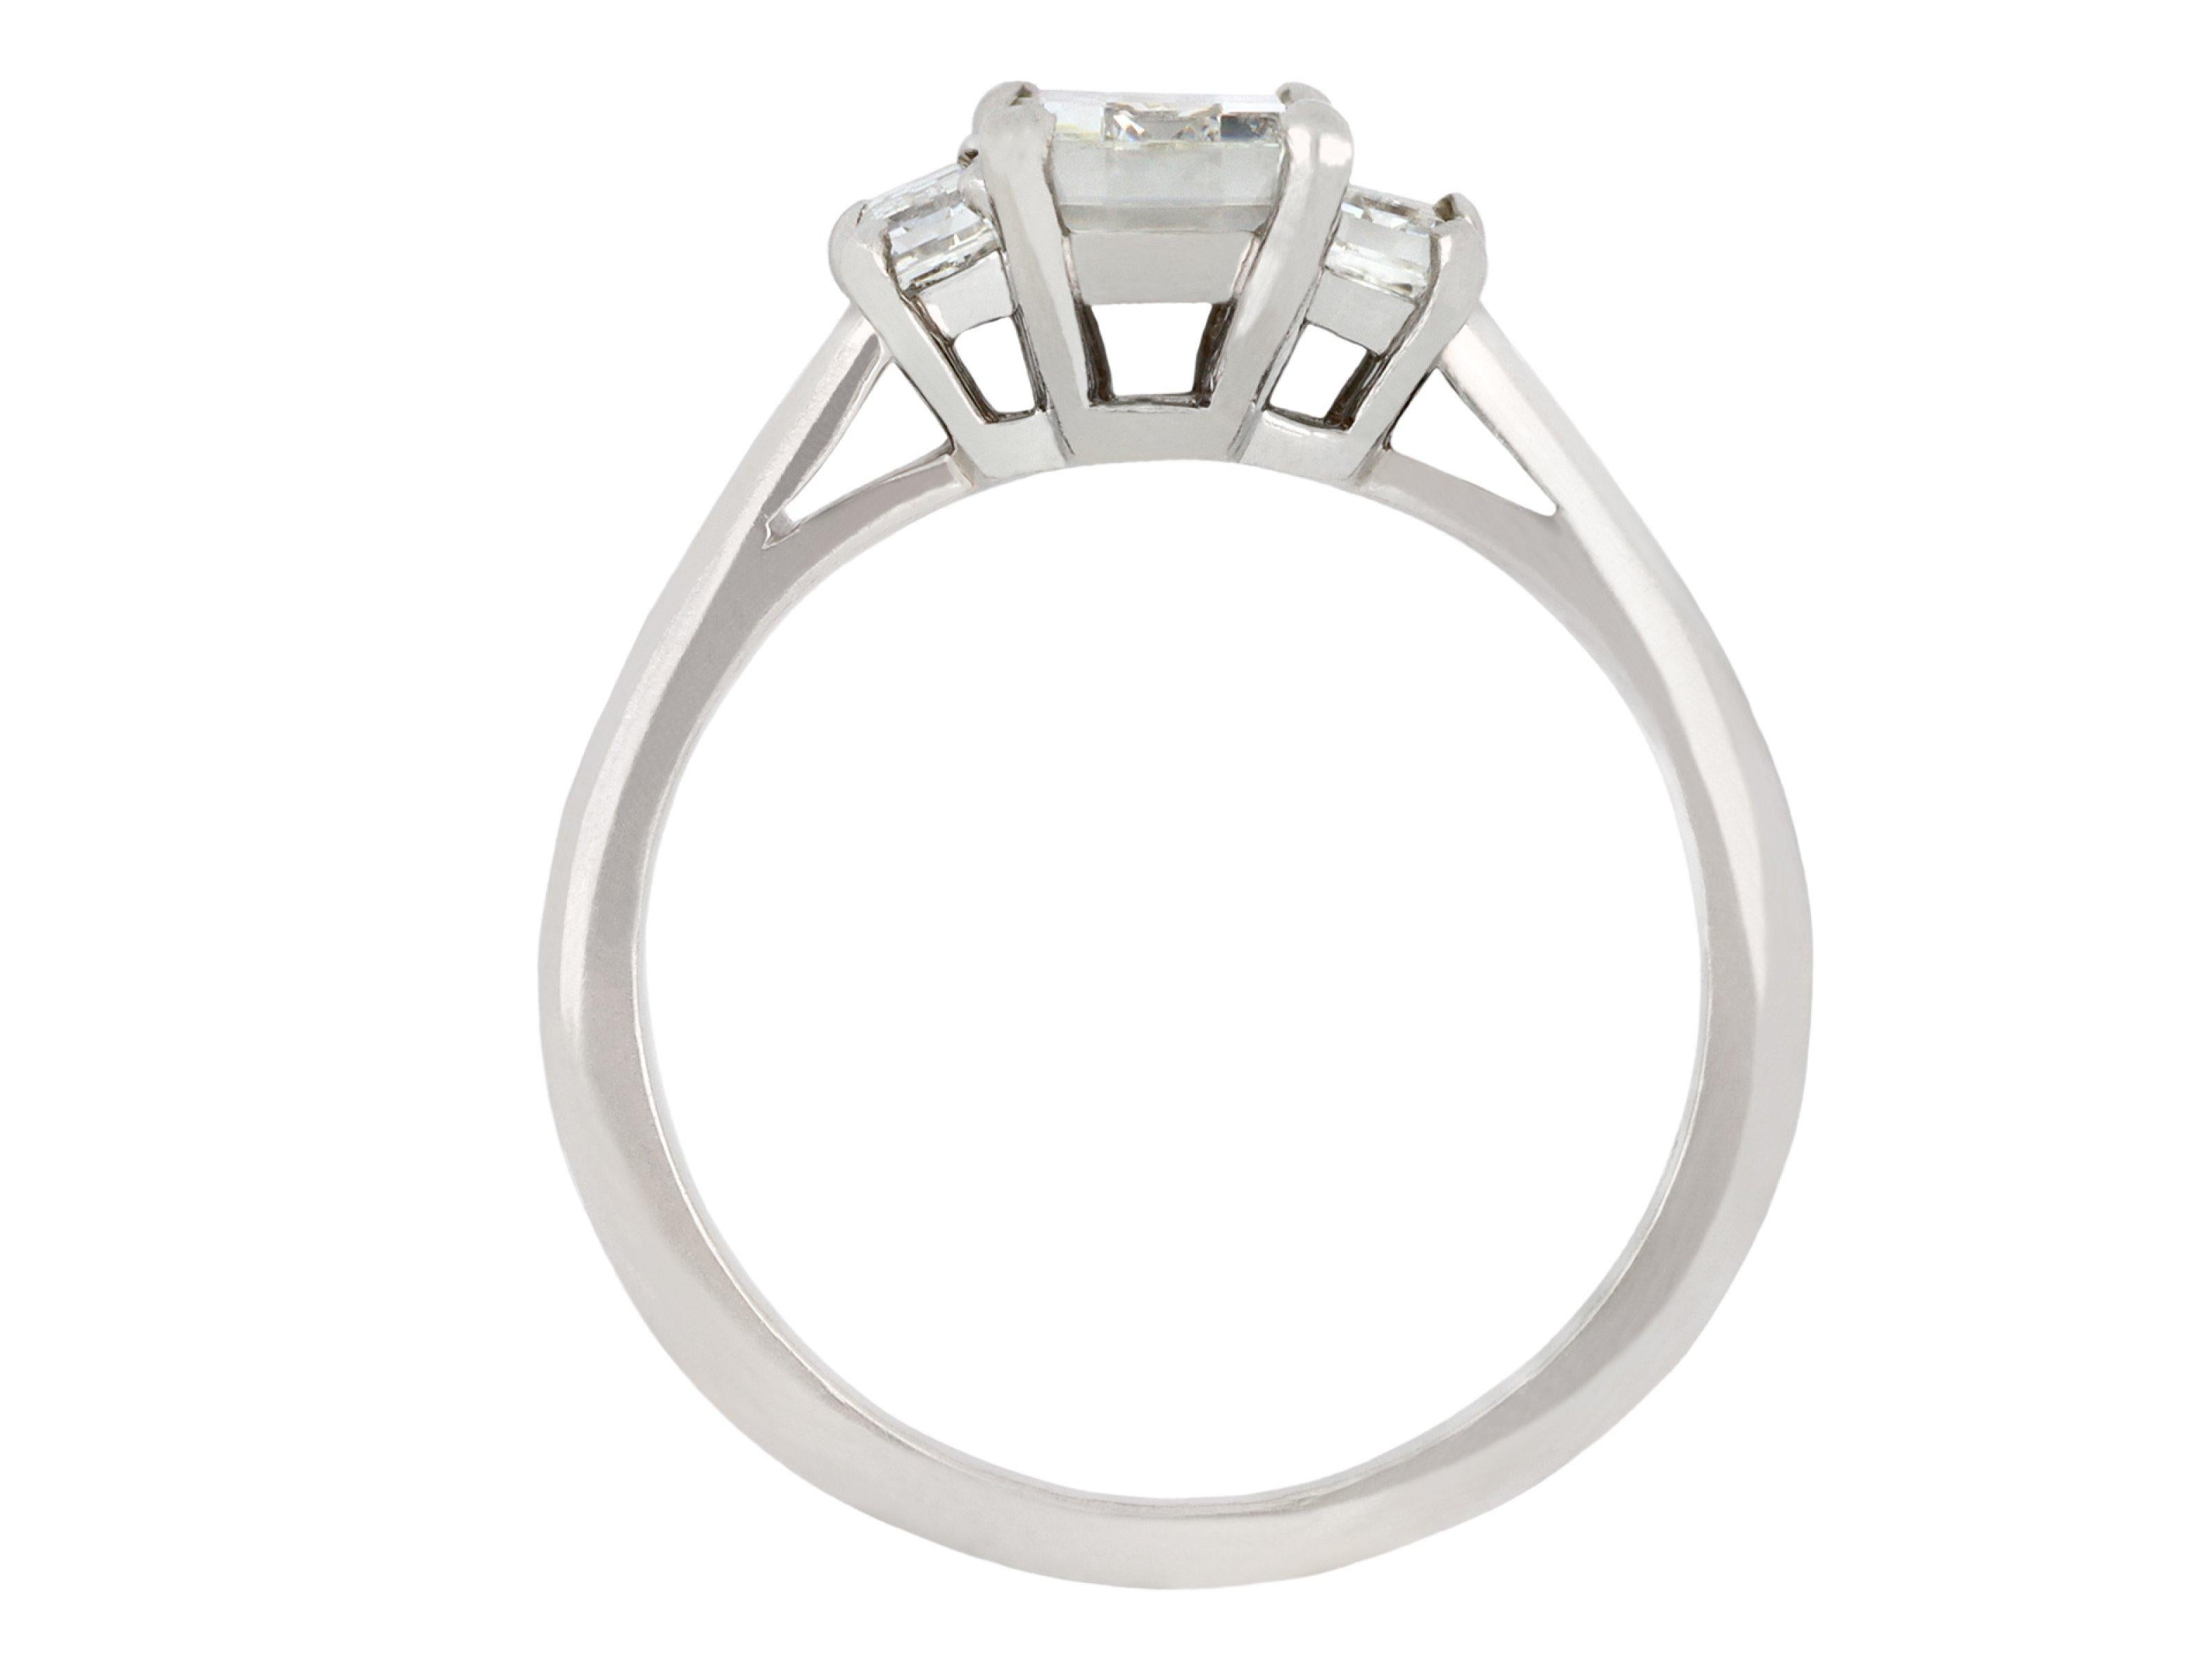 Cartier diamond flank solitaire ring. Set to centre with a rectangular step-cut diamond in an open back claw setting, with an approximate weight of 0.95 carats, flanked by two rectangular baguette cut diamonds in open back claw settings with a